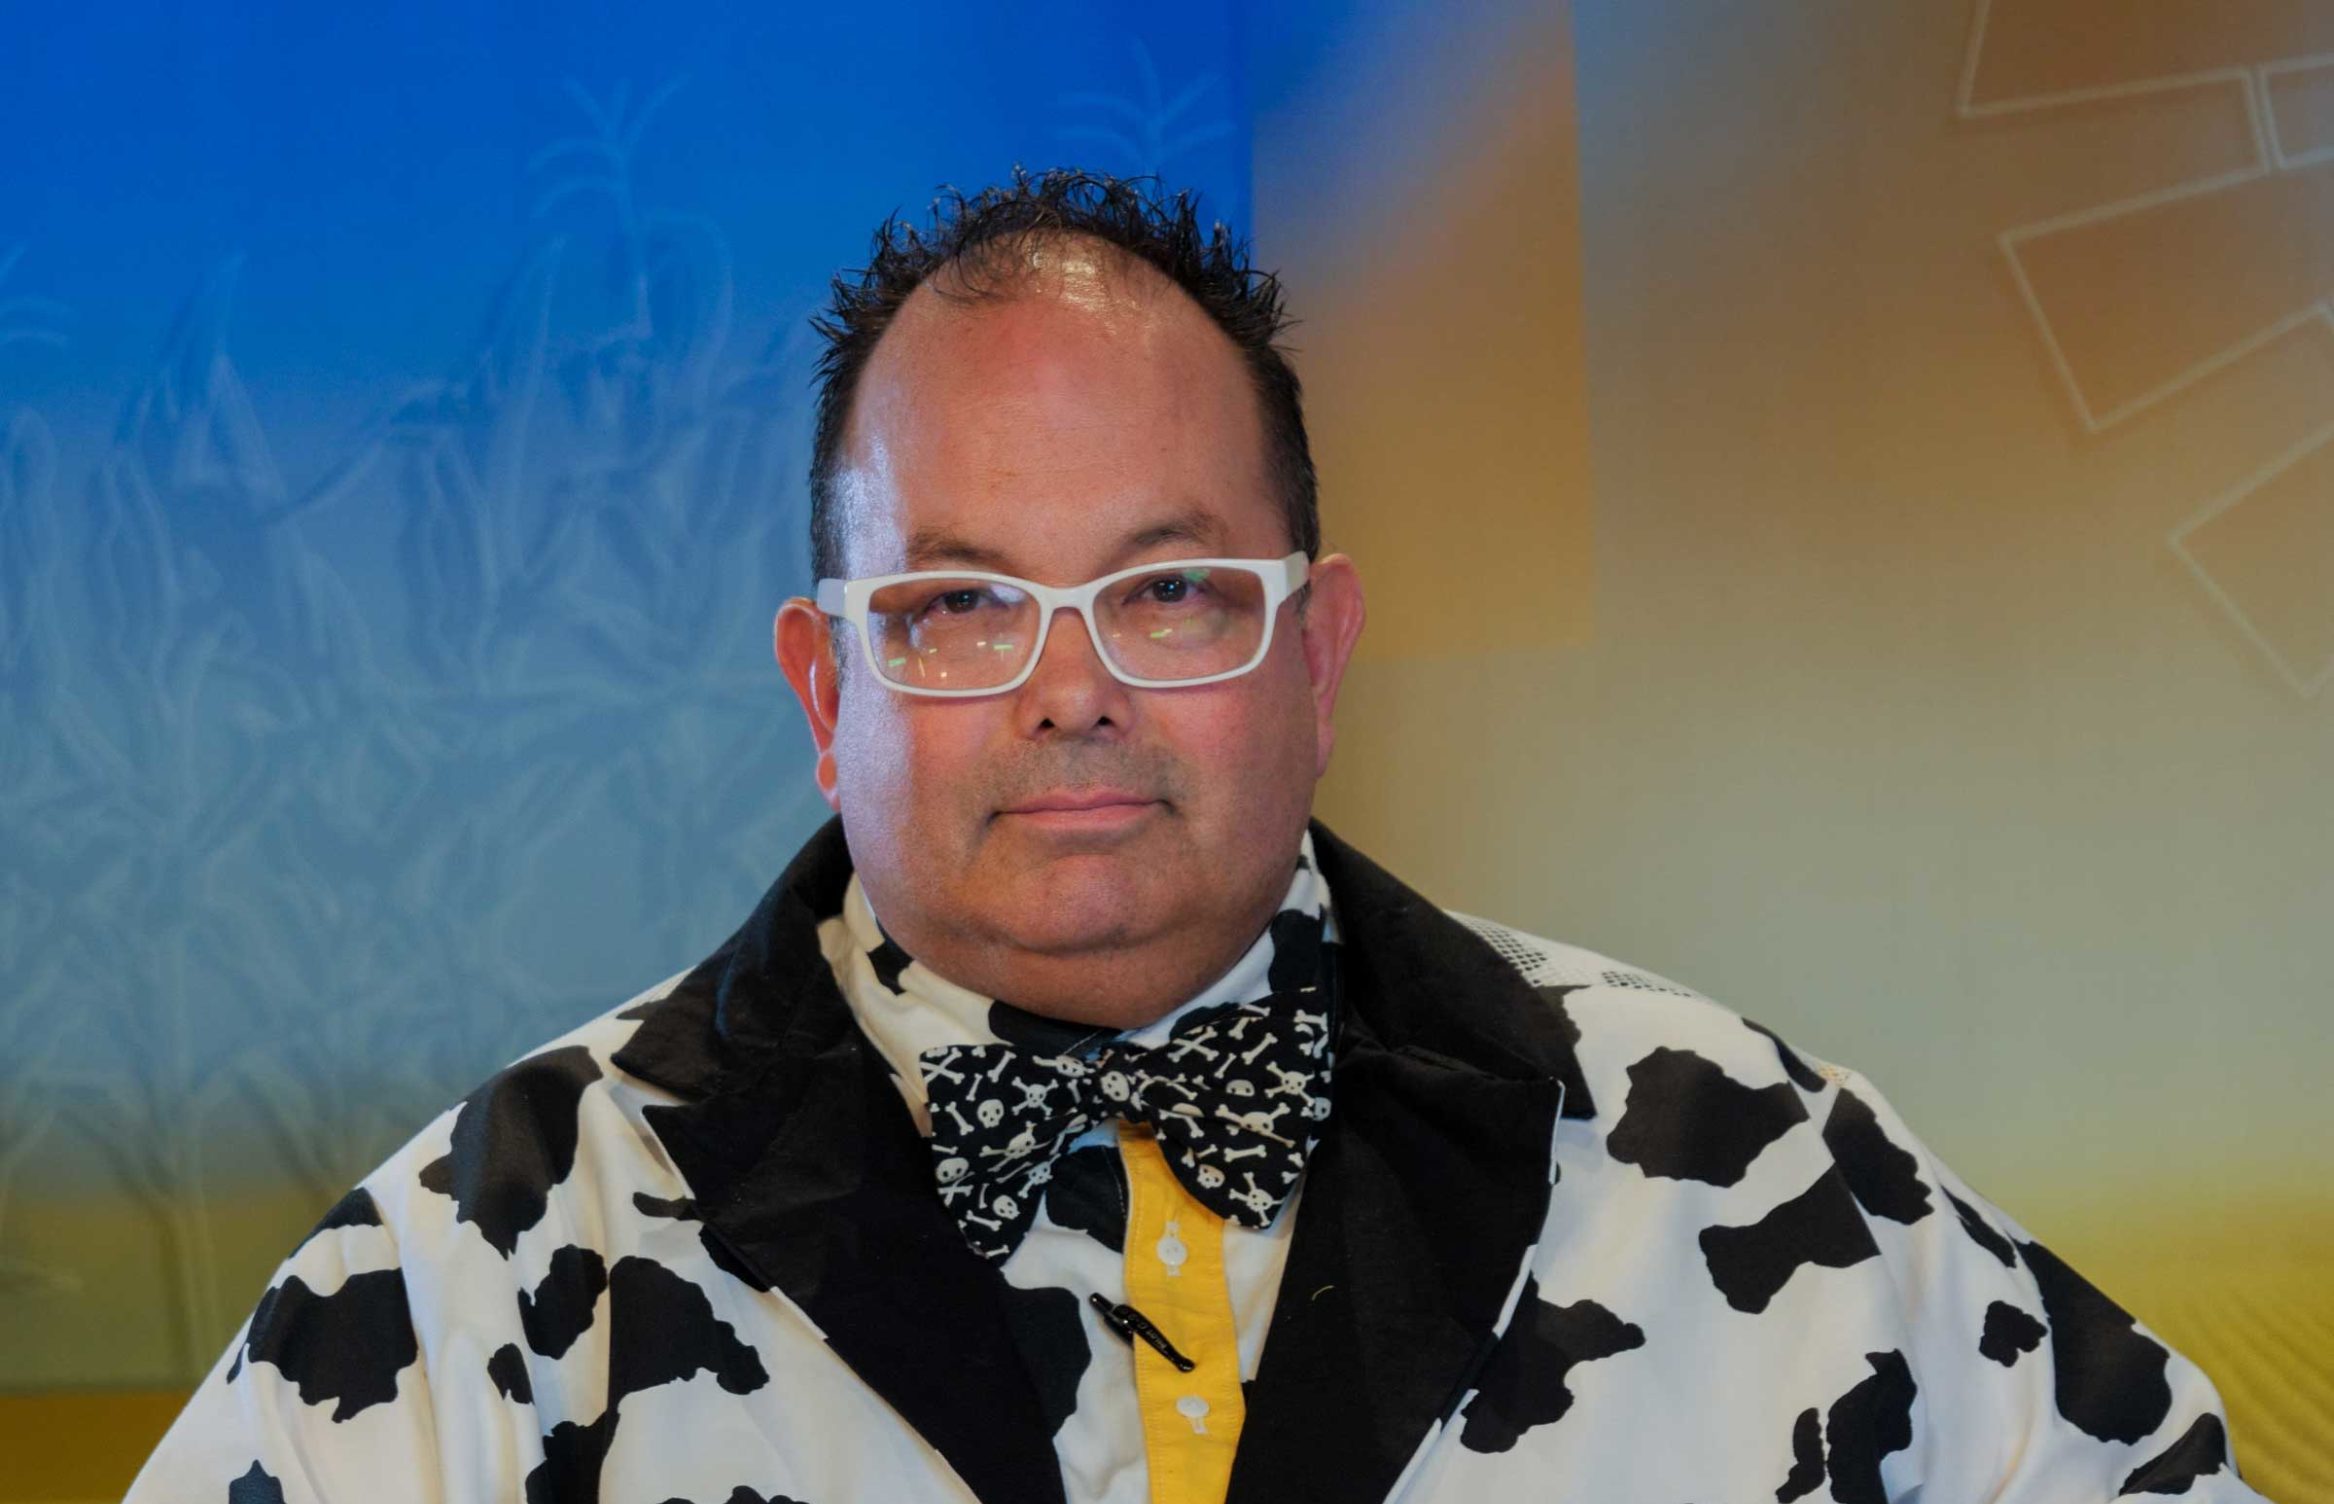 Meet “The Cow Guy” a New Show on RFD-TV, Part of Your DISH Network Lineup